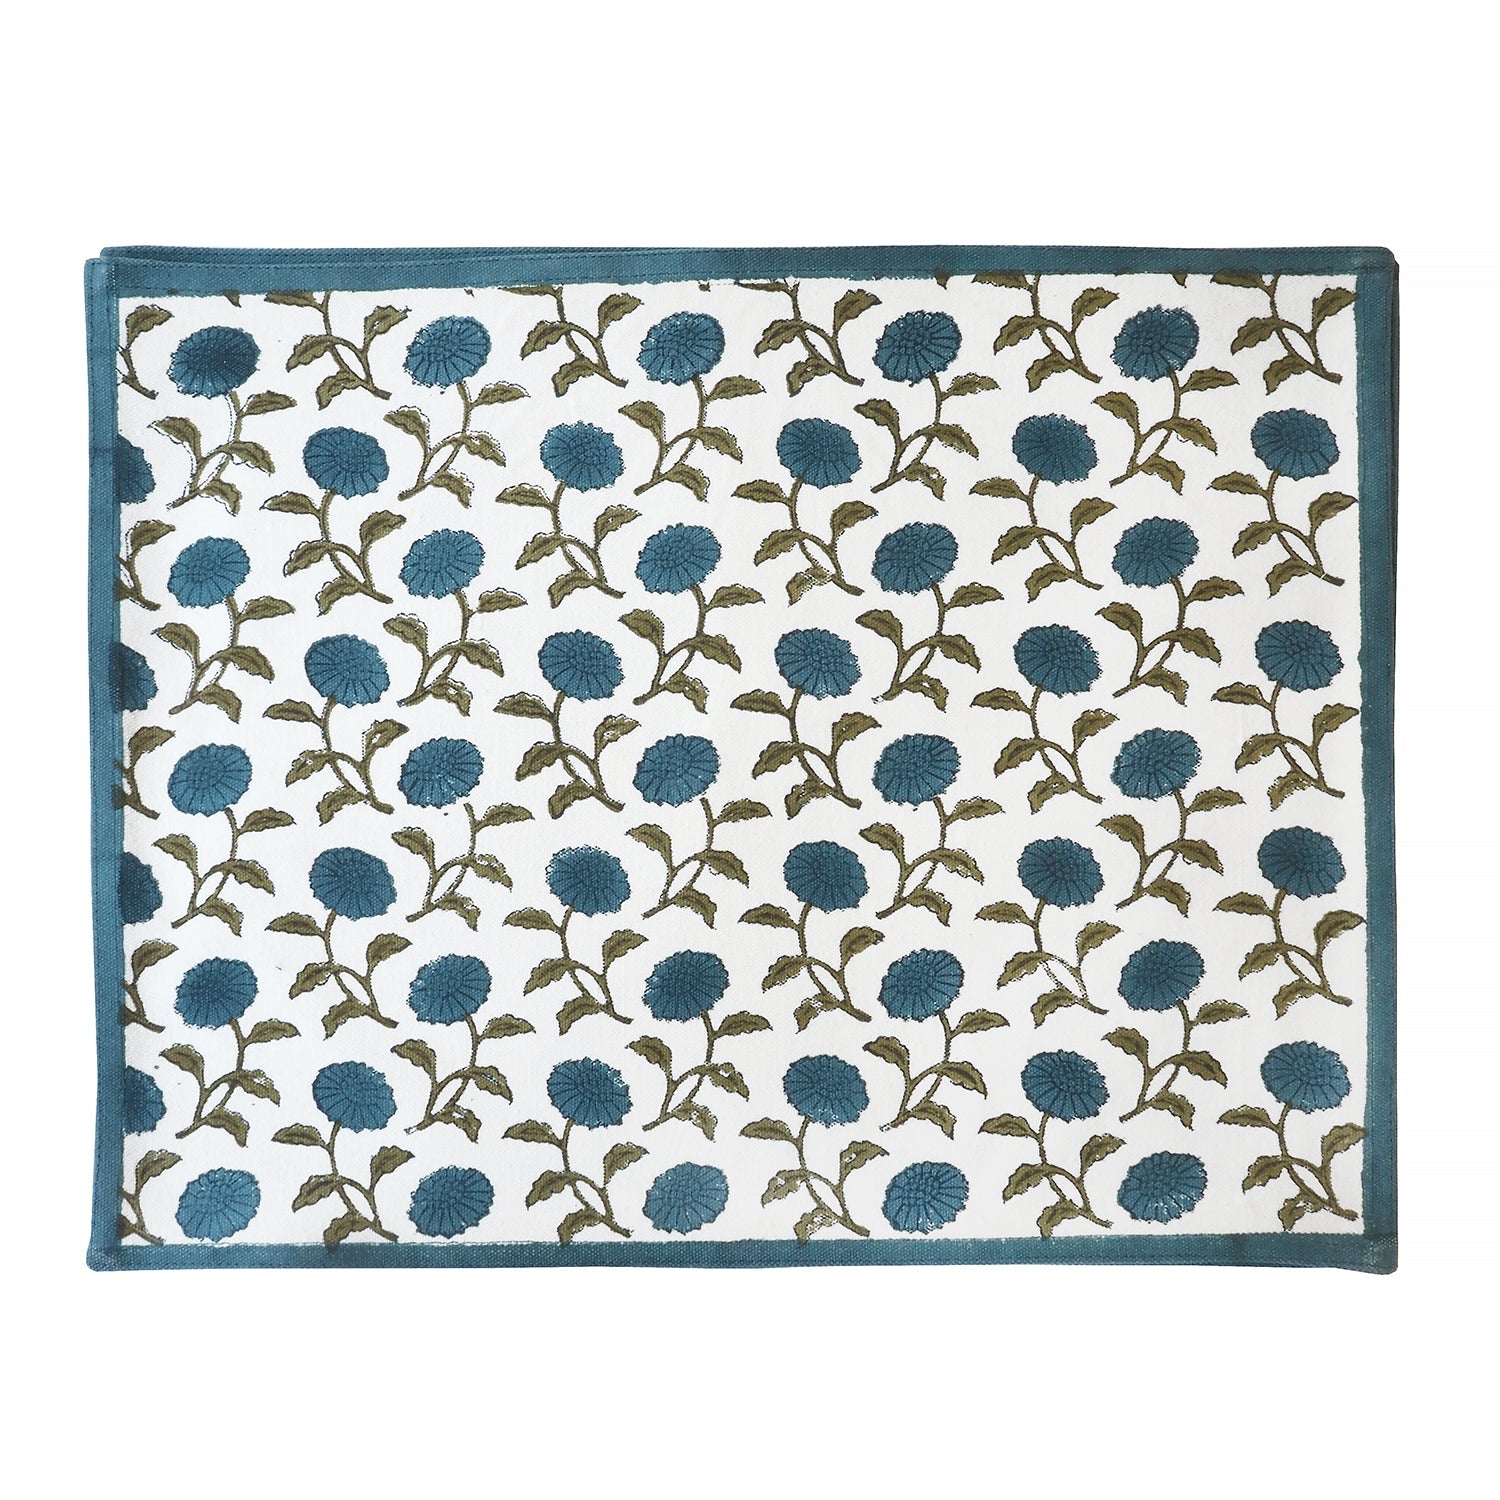 Placemats - Sienna (Set of 4)